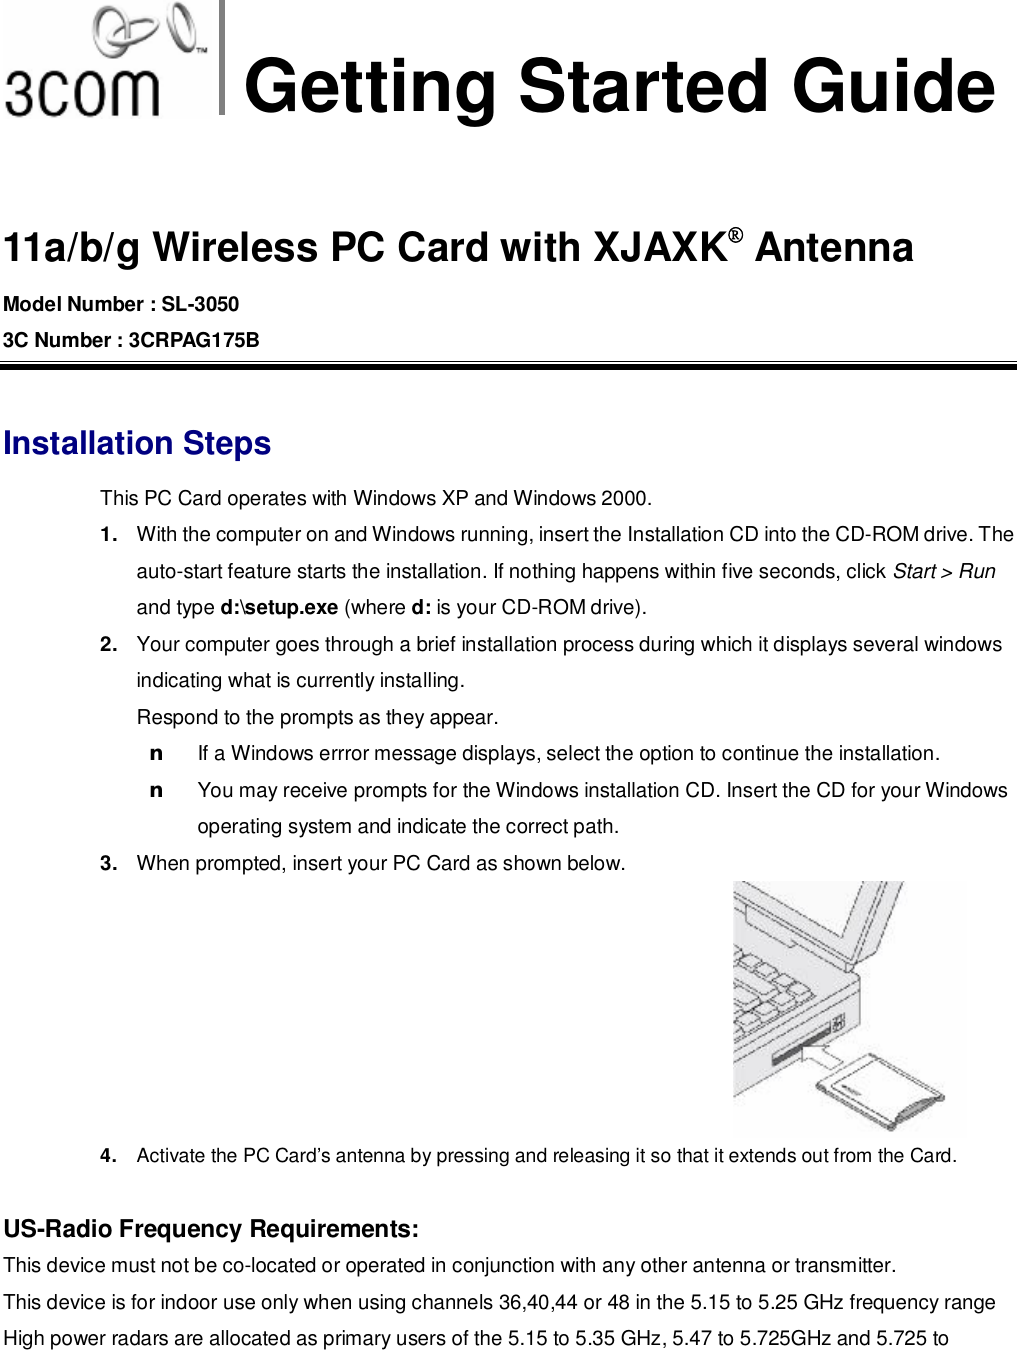 Getting Started Guide  11a/b/g Wireless PC Card with XJAXK® Antenna Model Number : SL-3050 3C Number : 3CRPAG175B  Installation Steps This PC Card operates with Windows XP and Windows 2000. 1.  With the computer on and Windows running, insert the Installation CD into the CD-ROM drive. The auto-start feature starts the installation. If nothing happens within five seconds, click Start &gt; Run and type d:\setup.exe (where d: is your CD-ROM drive). 2.  Your computer goes through a brief installation process during which it displays several windows indicating what is currently installing.  Respond to the prompts as they appear. n If a Windows errror message displays, select the option to continue the installation. n You may receive prompts for the Windows installation CD. Insert the CD for your Windows operating system and indicate the correct path. 3.  When prompted, insert your PC Card as shown below. 4.  Activate the PC Card’s antenna by pressing and releasing it so that it extends out from the Card.  US-Radio Frequency Requirements: This device must not be co-located or operated in conjunction with any other antenna or transmitter.  This device is for indoor use only when using channels 36,40,44 or 48 in the 5.15 to 5.25 GHz frequency range High power radars are allocated as primary users of the 5.15 to 5.35 GHz, 5.47 to 5.725GHz and 5.725 to 